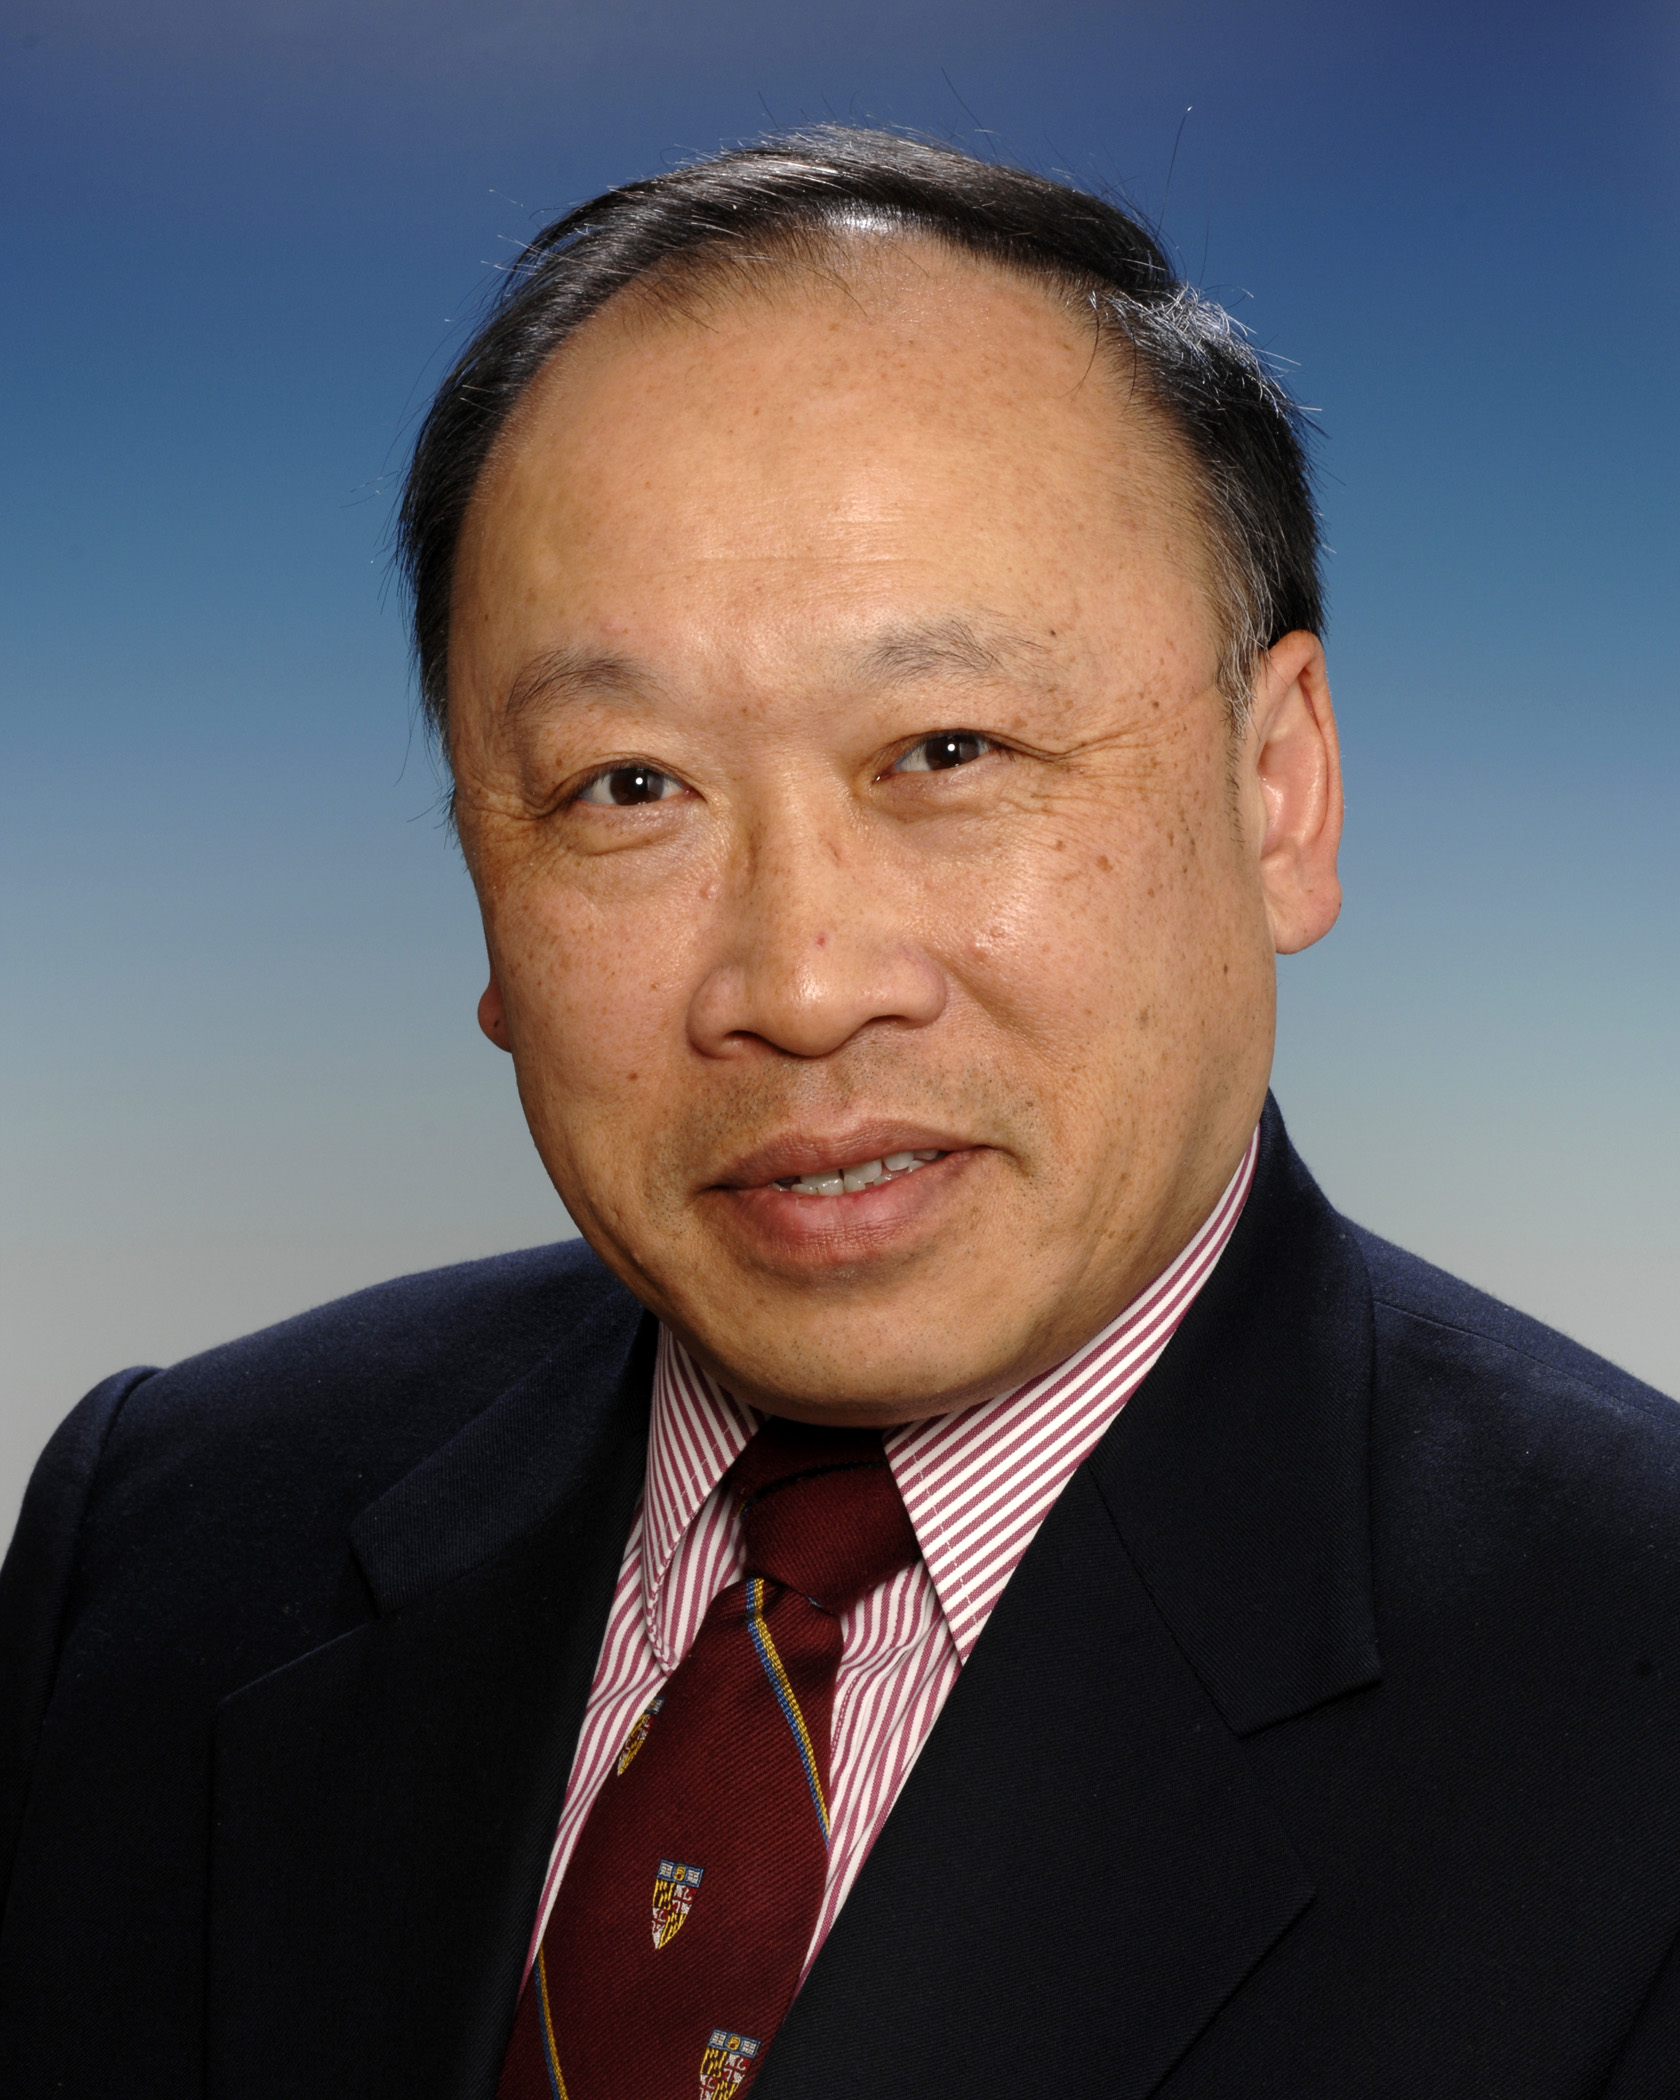 Paul Chew, MD, Head of the Sanofi R&D North America Hub and Senior Vice President, Group Chief Medical Officer